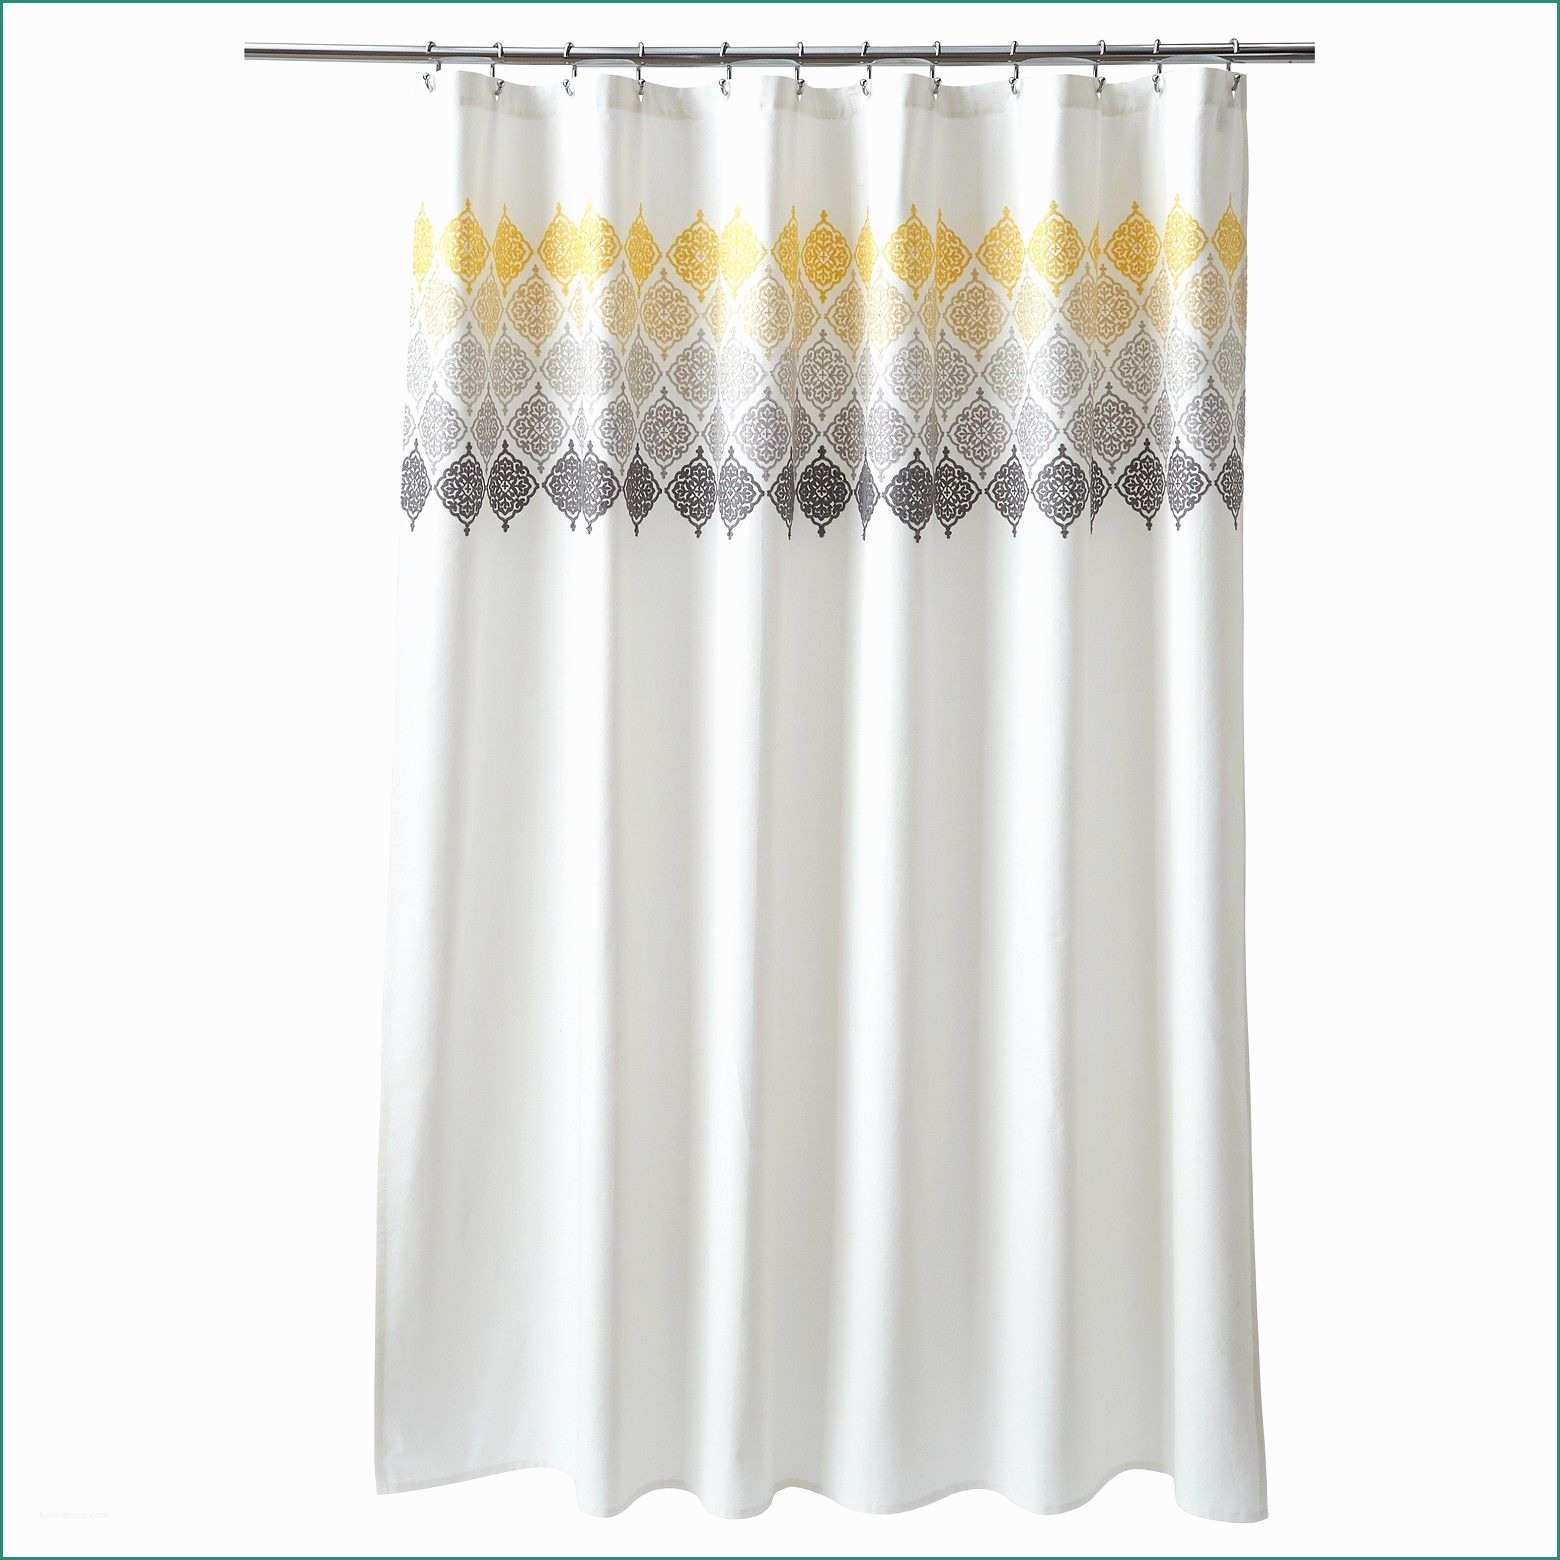 Cucine Shabby Chic Moderne E 20 Minimalist Simply Shabby Chic Embroidered Shower Curtain